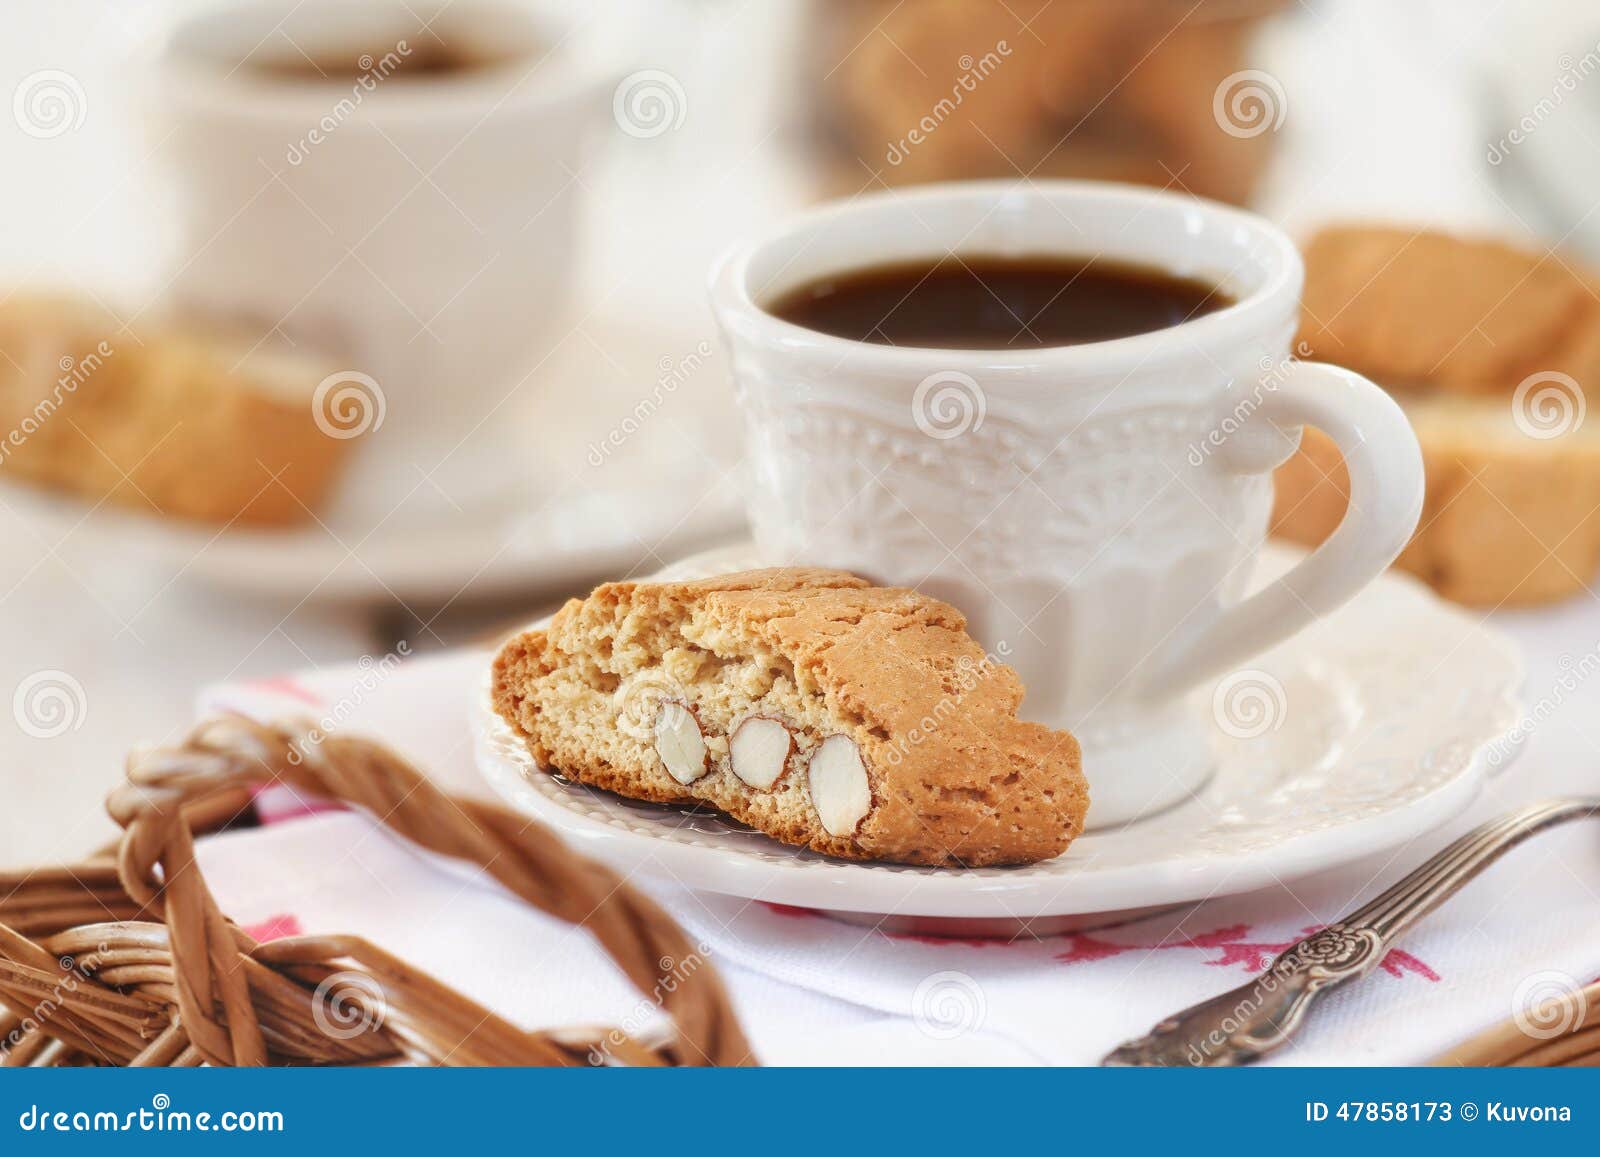 Morning Coffee with Biscuits Stock Image - Image of shabby, snack ...